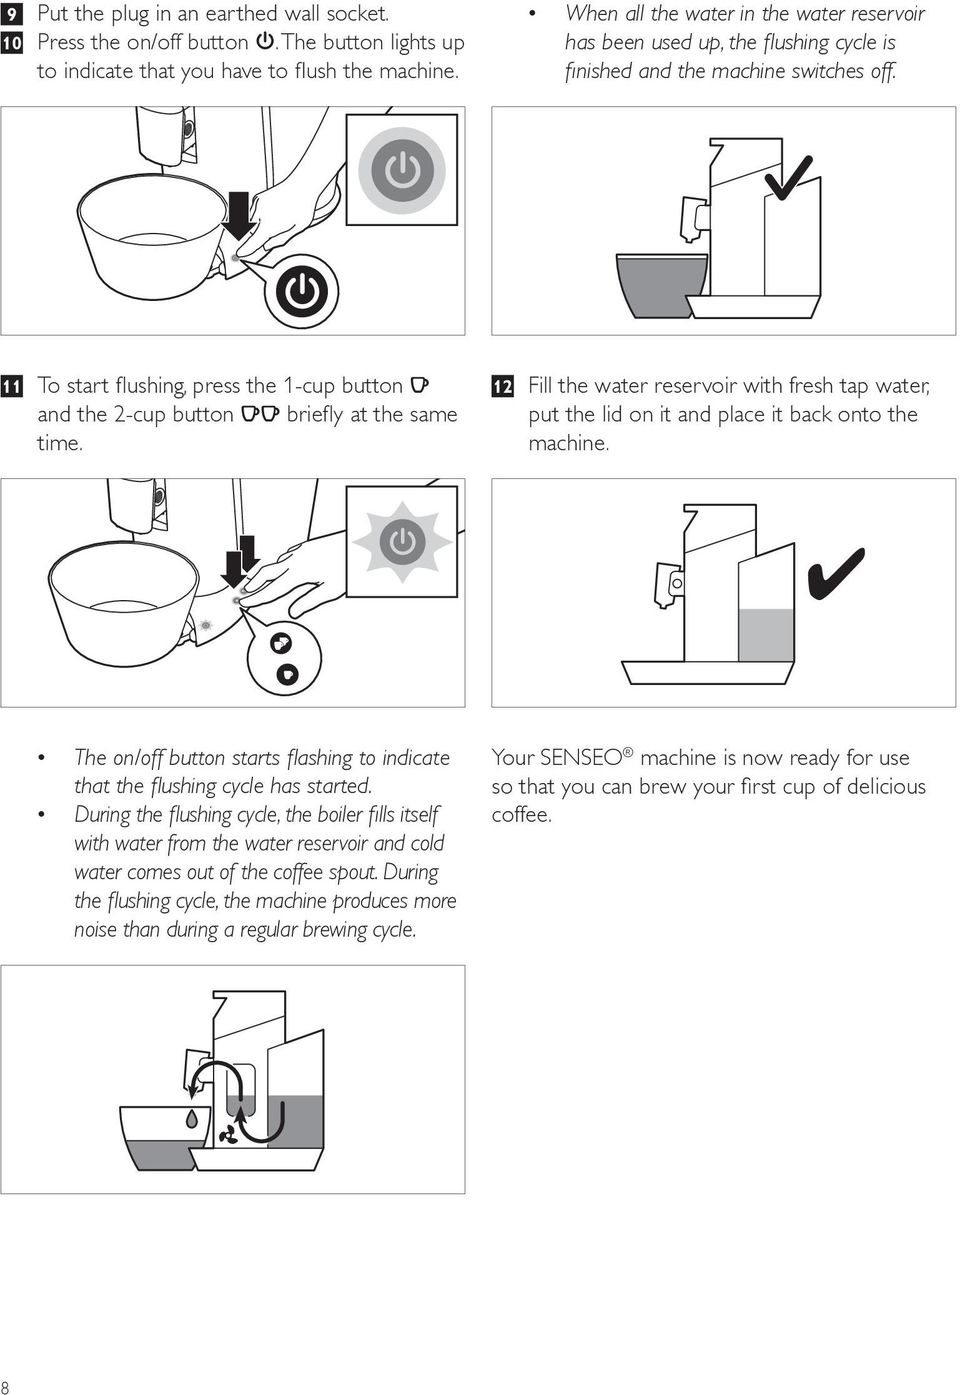 11 To start flushing, press the 1-cup button q and the 2-cup button qq briefly at the same time. 12 Fill the water reservoir with fresh tap water, put the lid on it and place it back onto the machine.